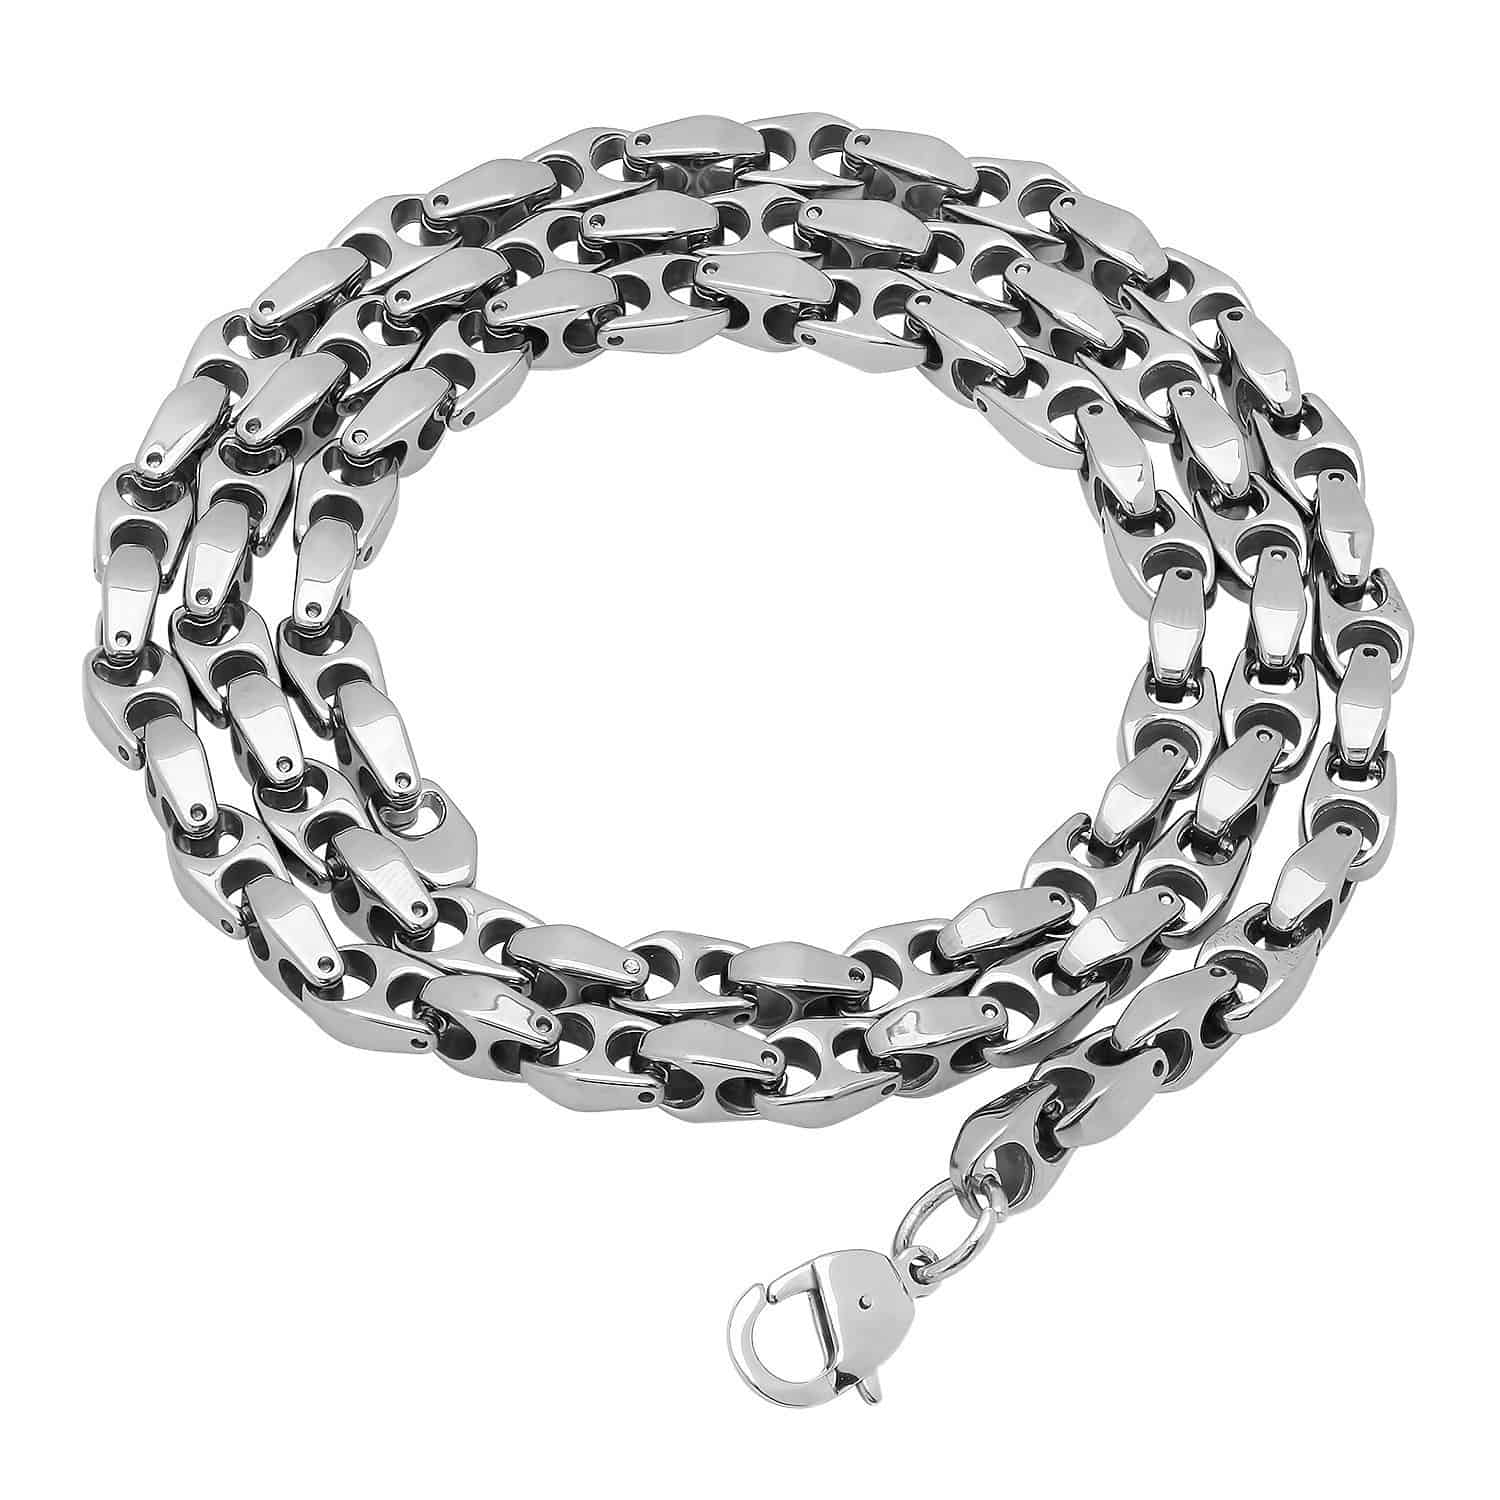 10 Best Types of Necklace Chains (Pros and Cons) (2023)